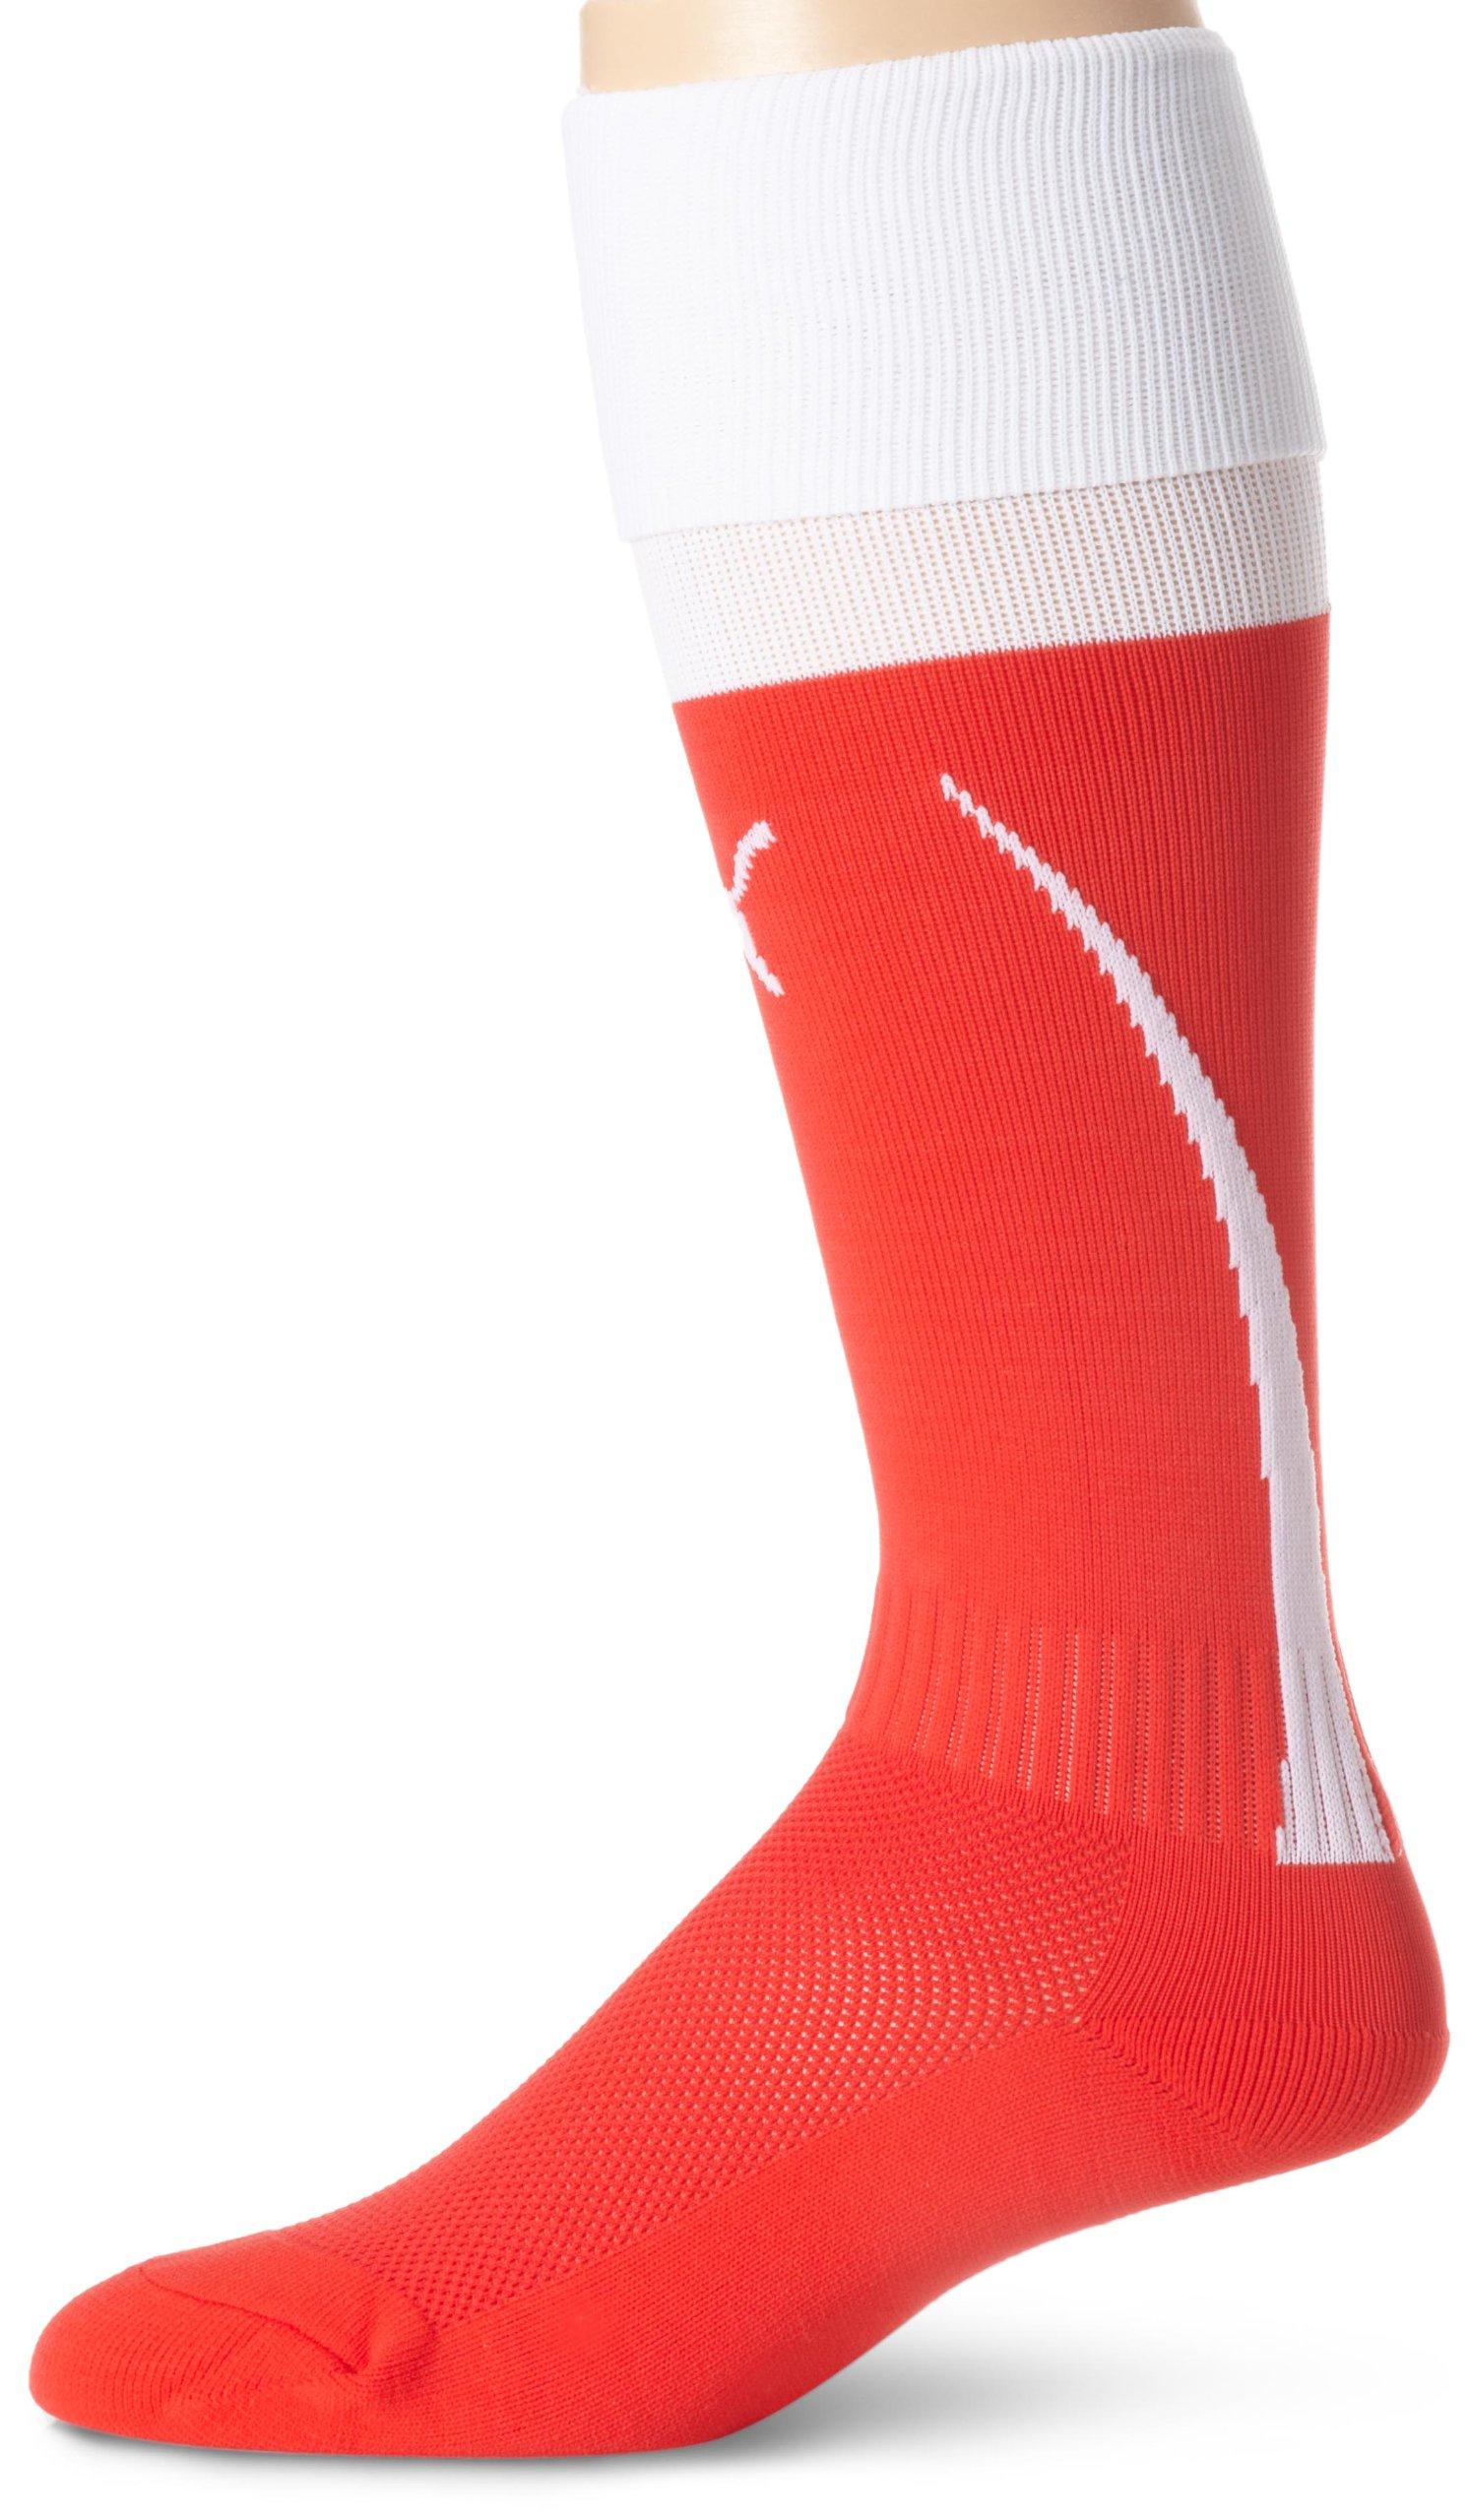 PUMA Power 5 Socks in Red for Men - Save 23% - Lyst